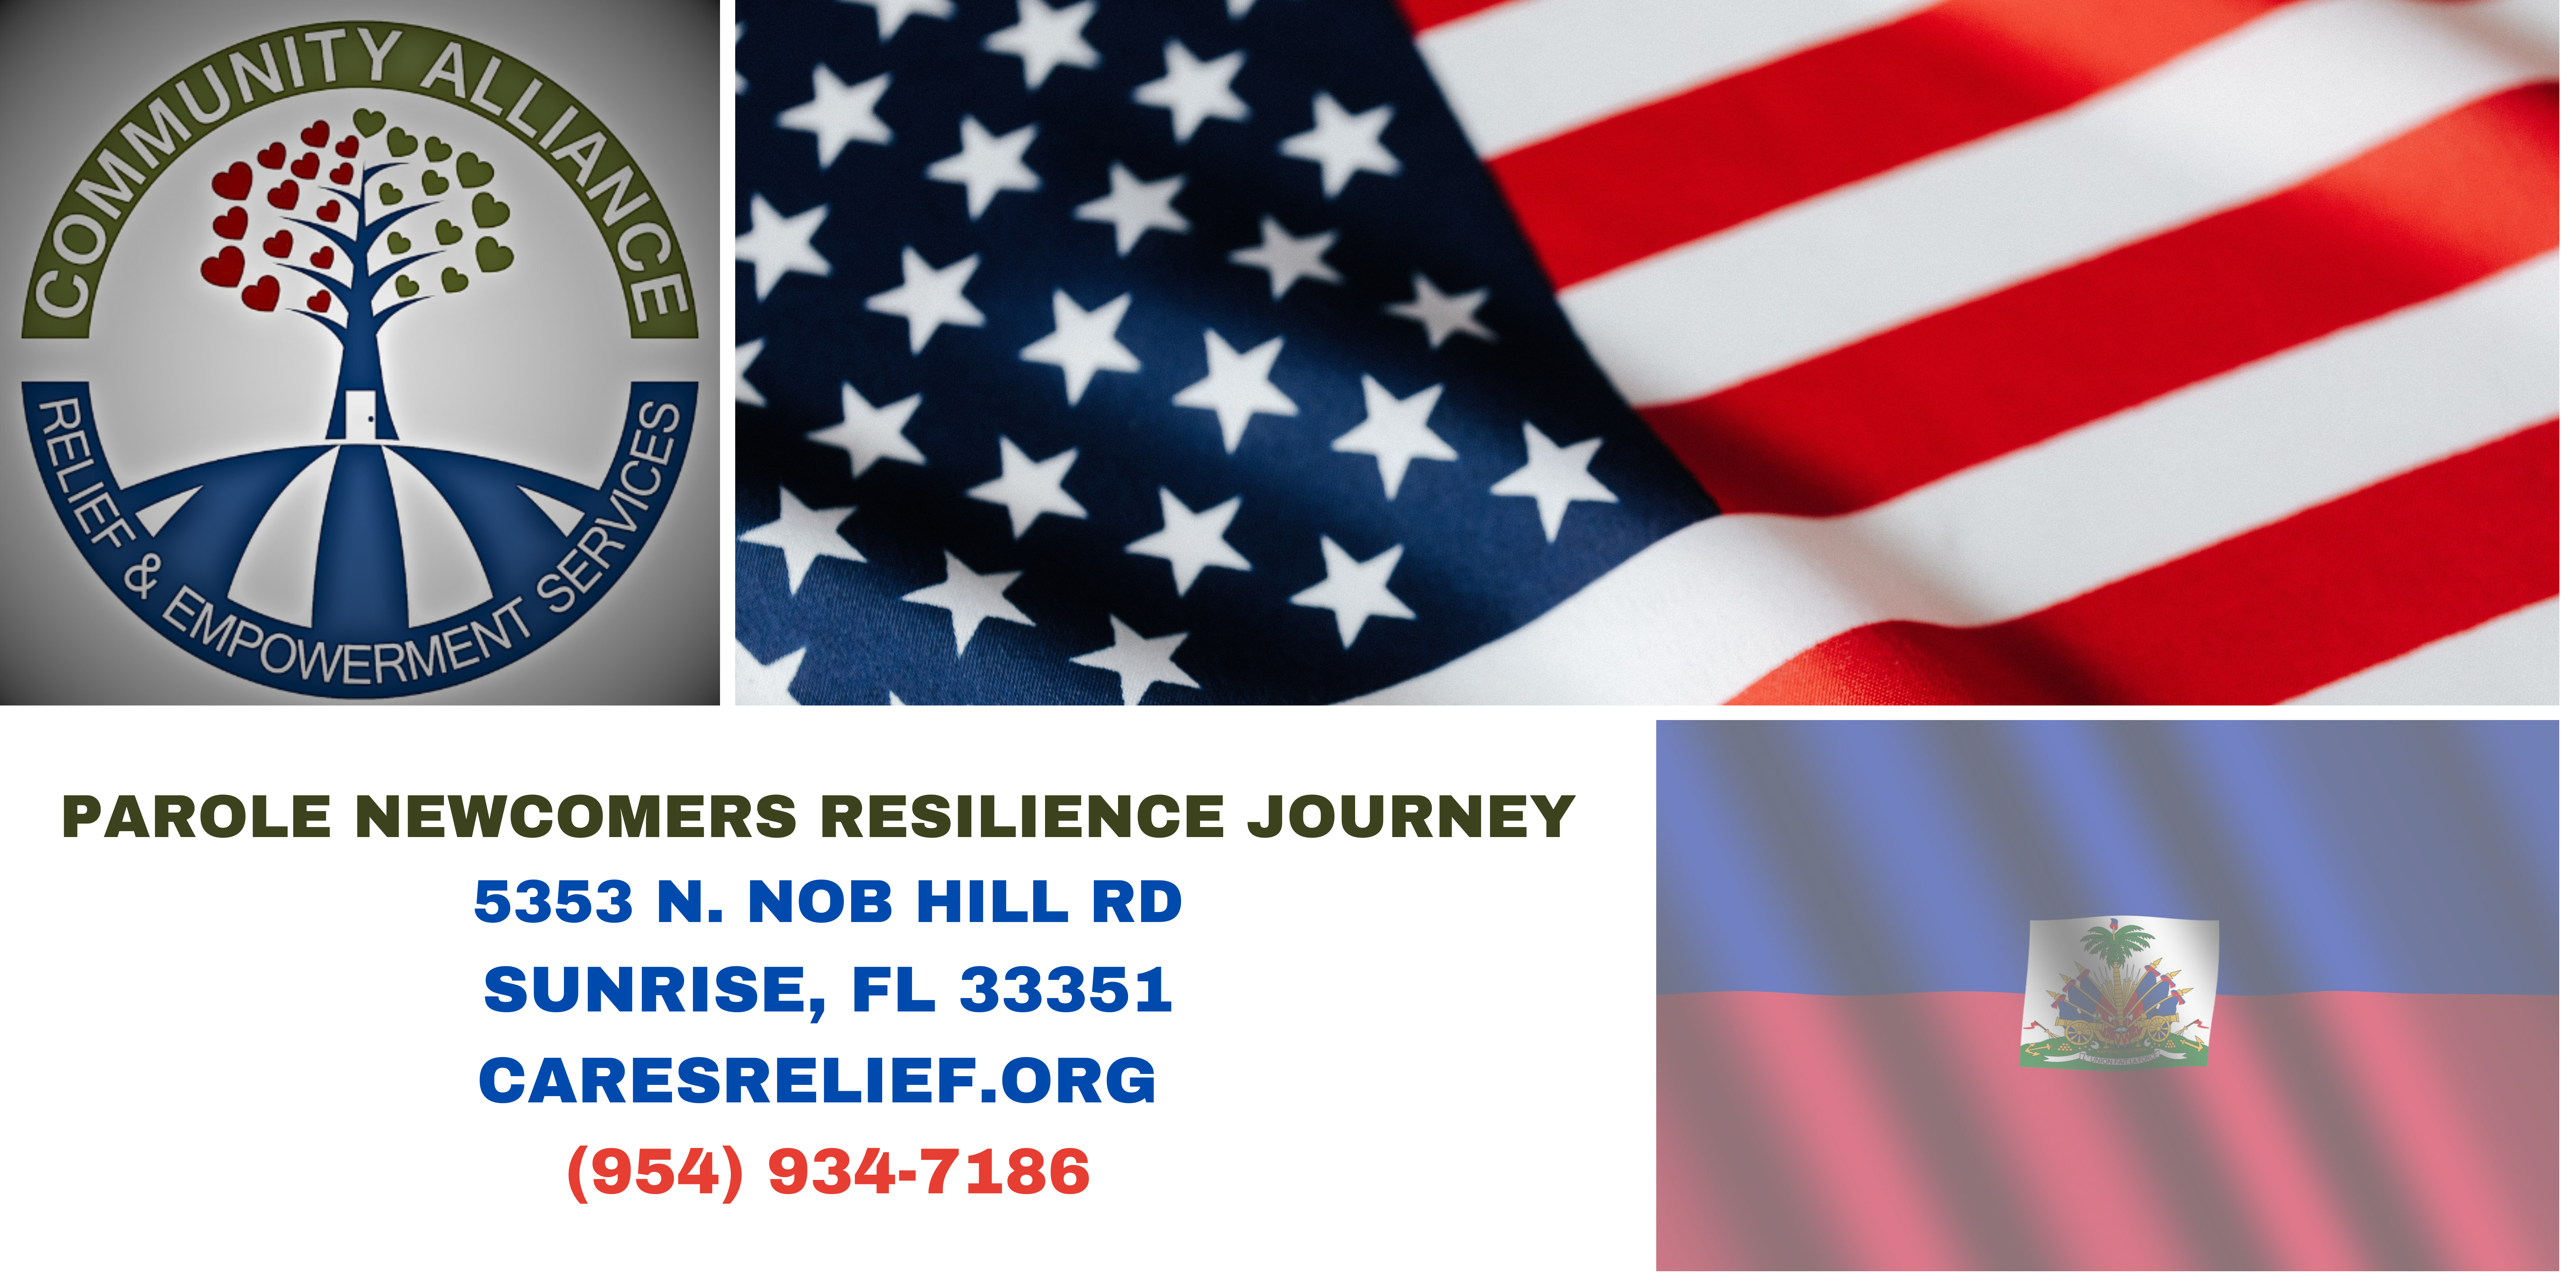 Parole Newcomers Resilience Journey